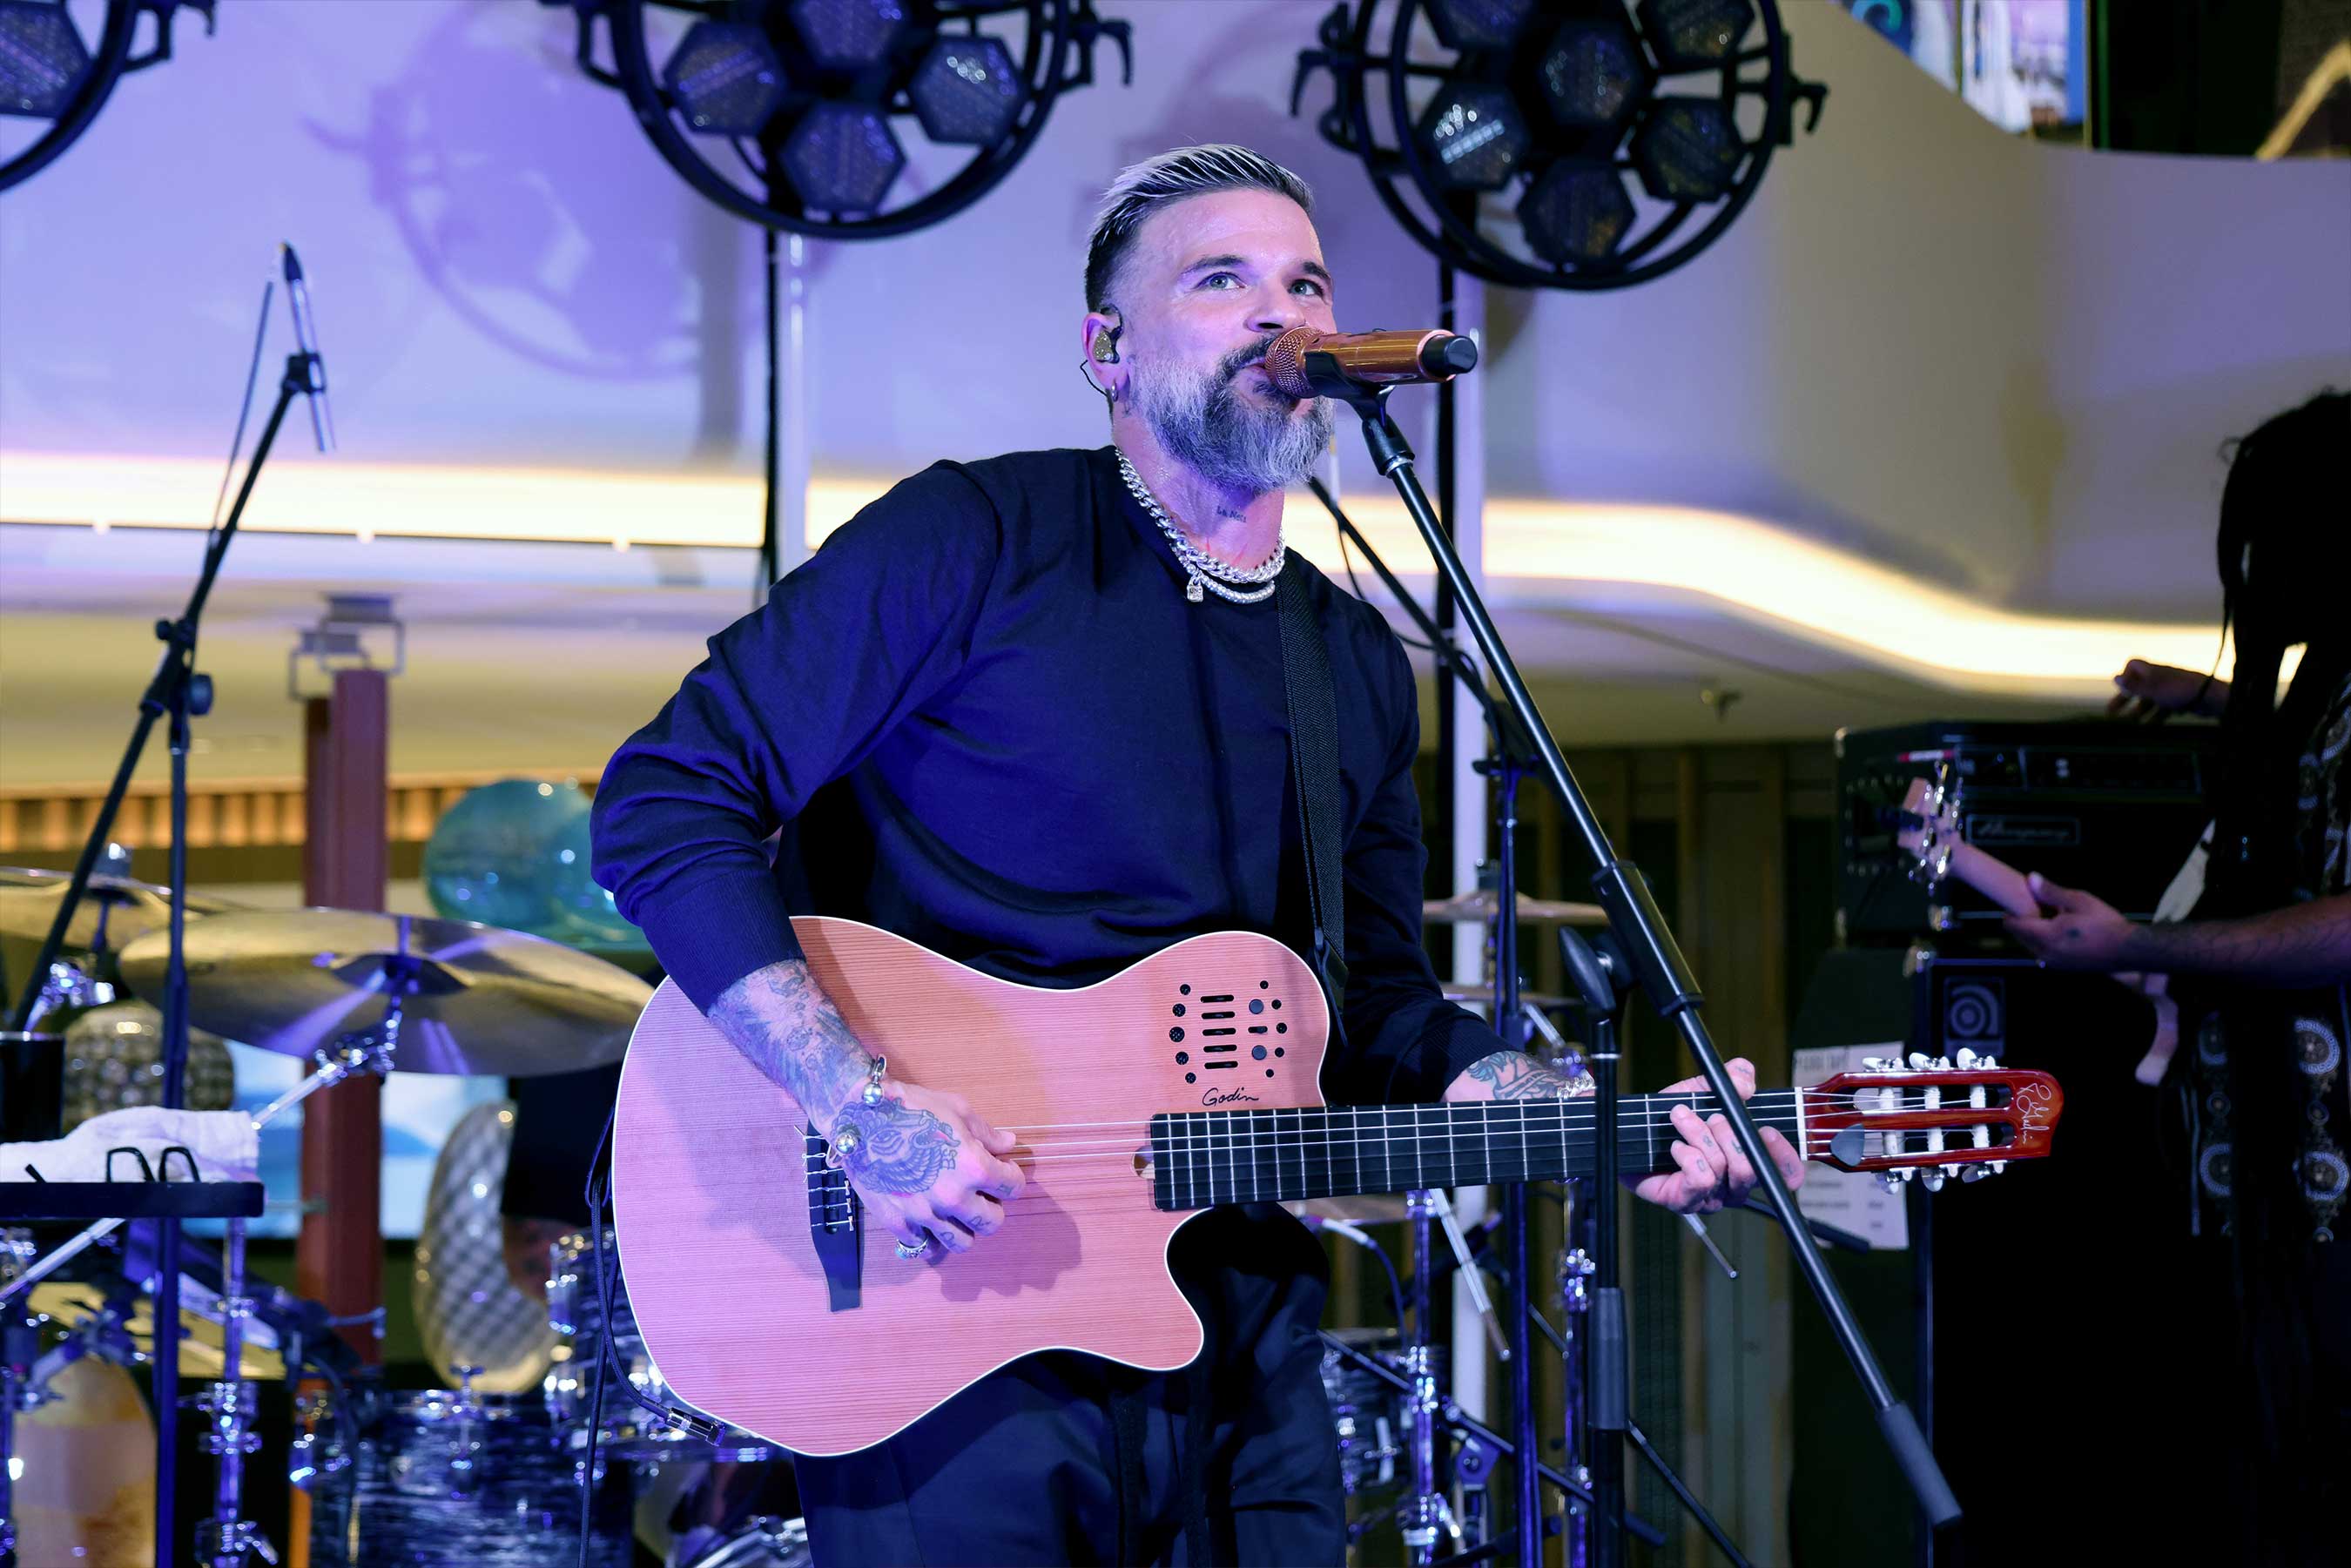 Recently announced GRAMMY® Award-nominated artist Pedro Capó performs at Norwegian Viva’s launch party in Miami, welcoming Norwegian Cruise Line’s newest ship to its fleet.